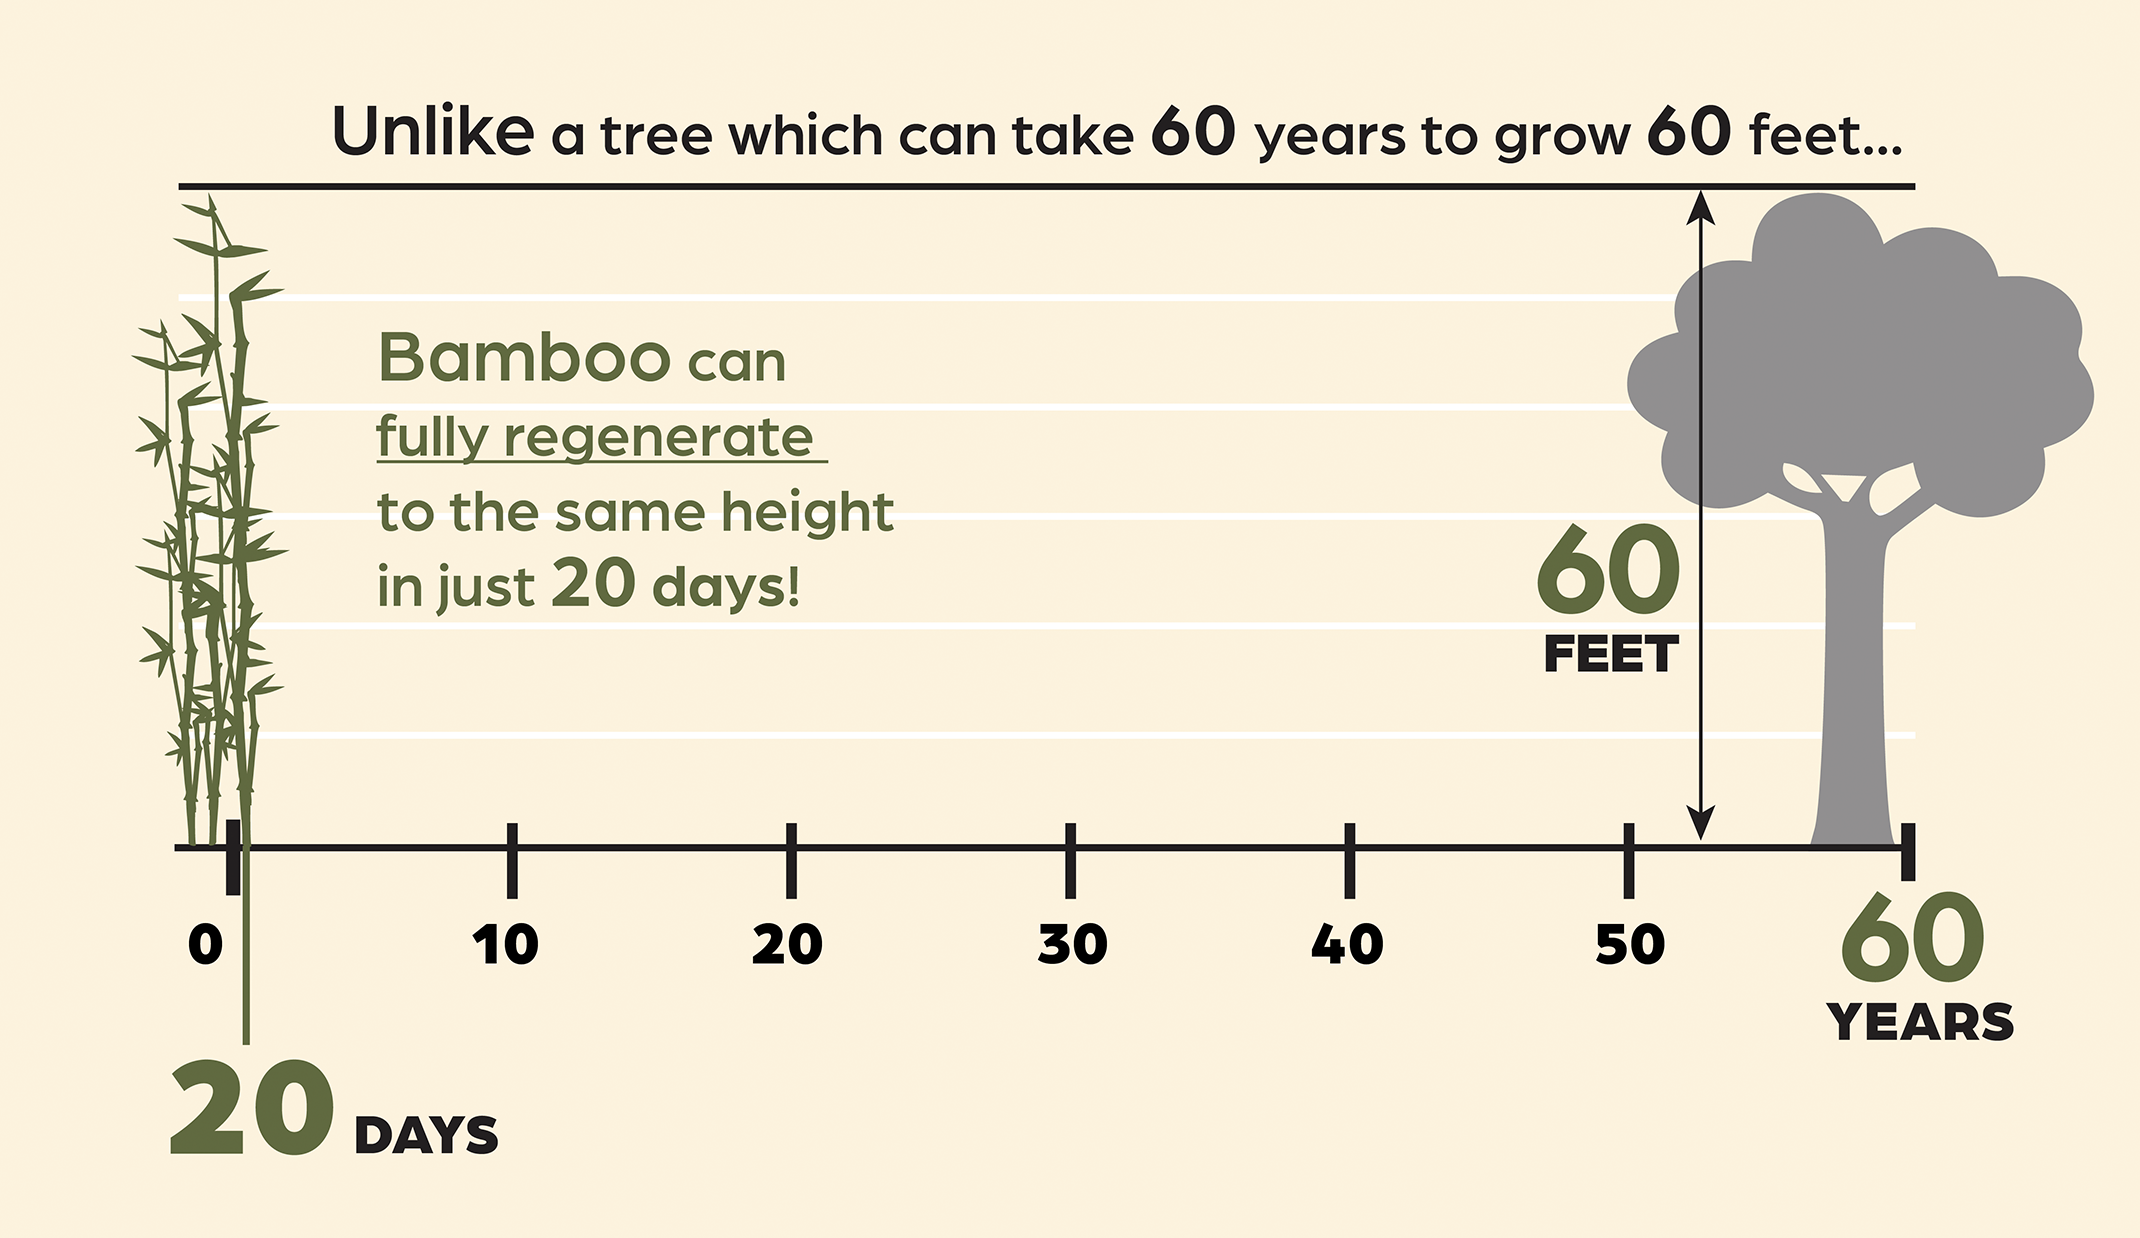 Unlike a tree which can take 60 years to grow 60 feet, bamboo can fully regenerate to the same height in just 20 days.